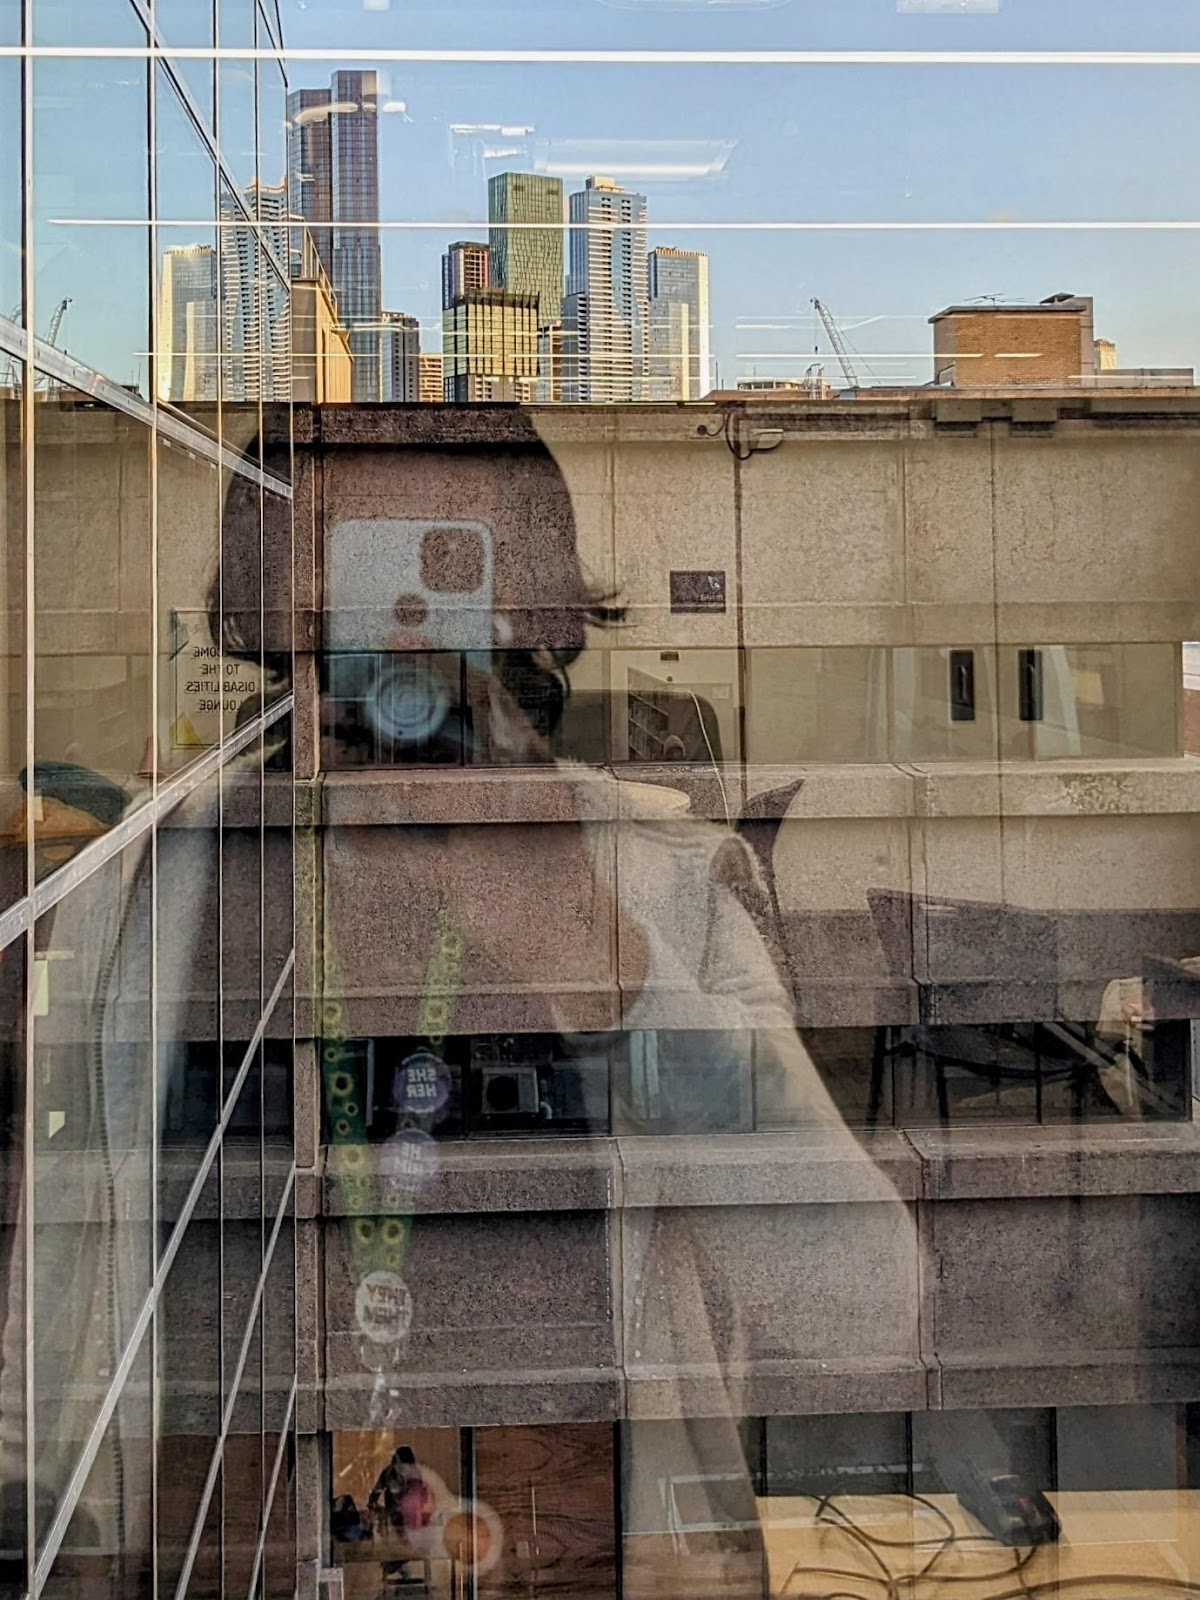 A self portrait, shot on a camera phone in the reflection of a window looking out from the Disabilities Lounge in Building 168 to the Melbourne Skyline. The phone obscures the photographer's face. They are wearing a sunflower lanyard, adorned with pins and a fidget toy that hangs amongst the keys.